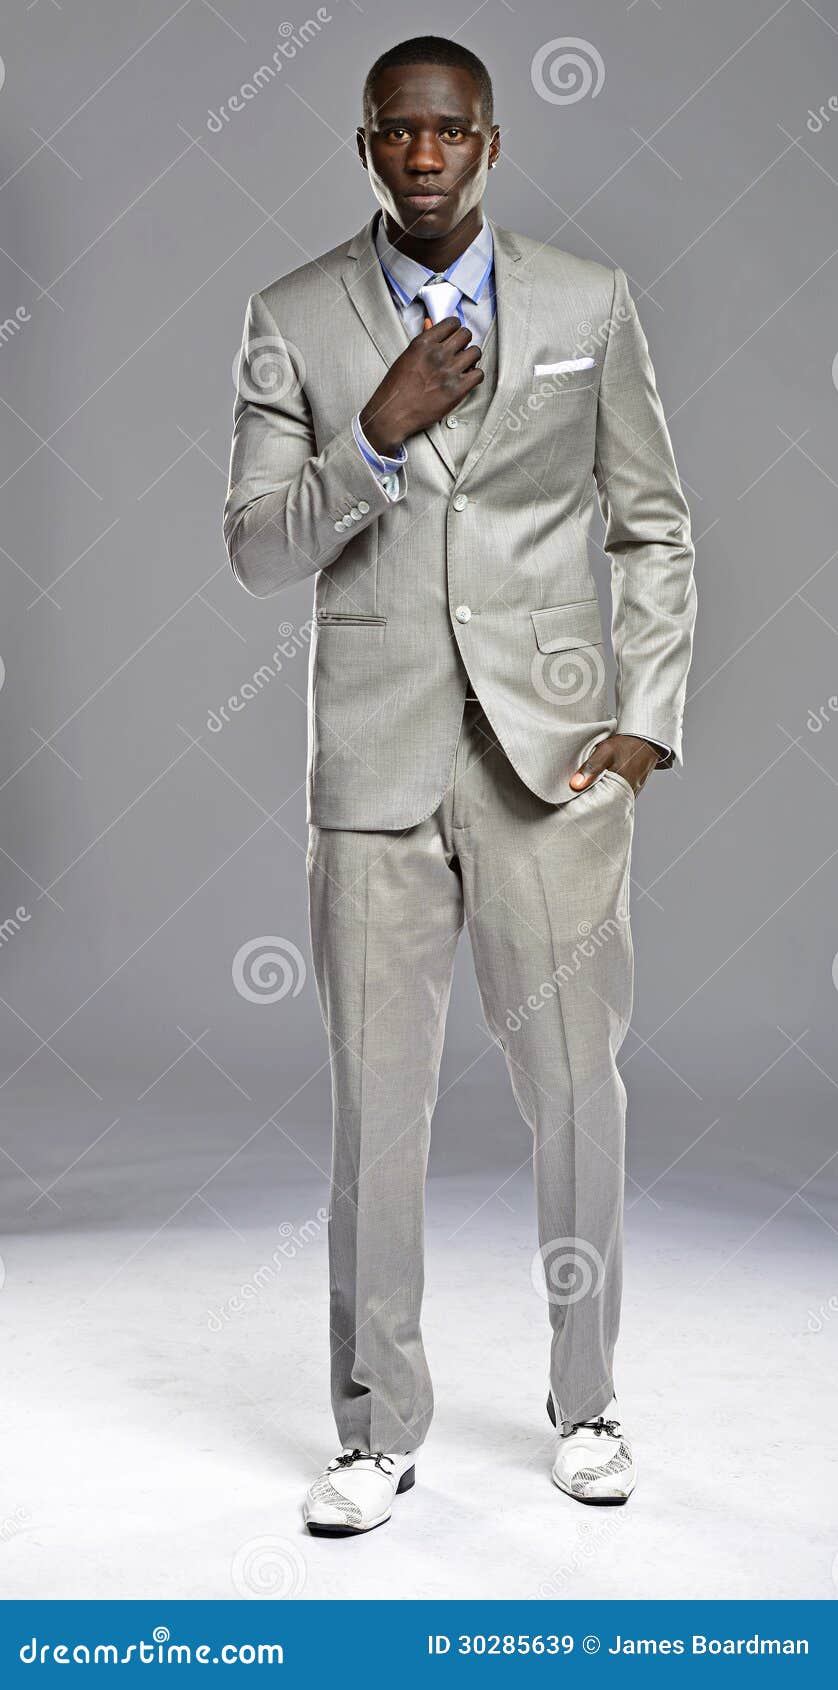 Black man in a suit stock image. Image of descent, father - 30285639